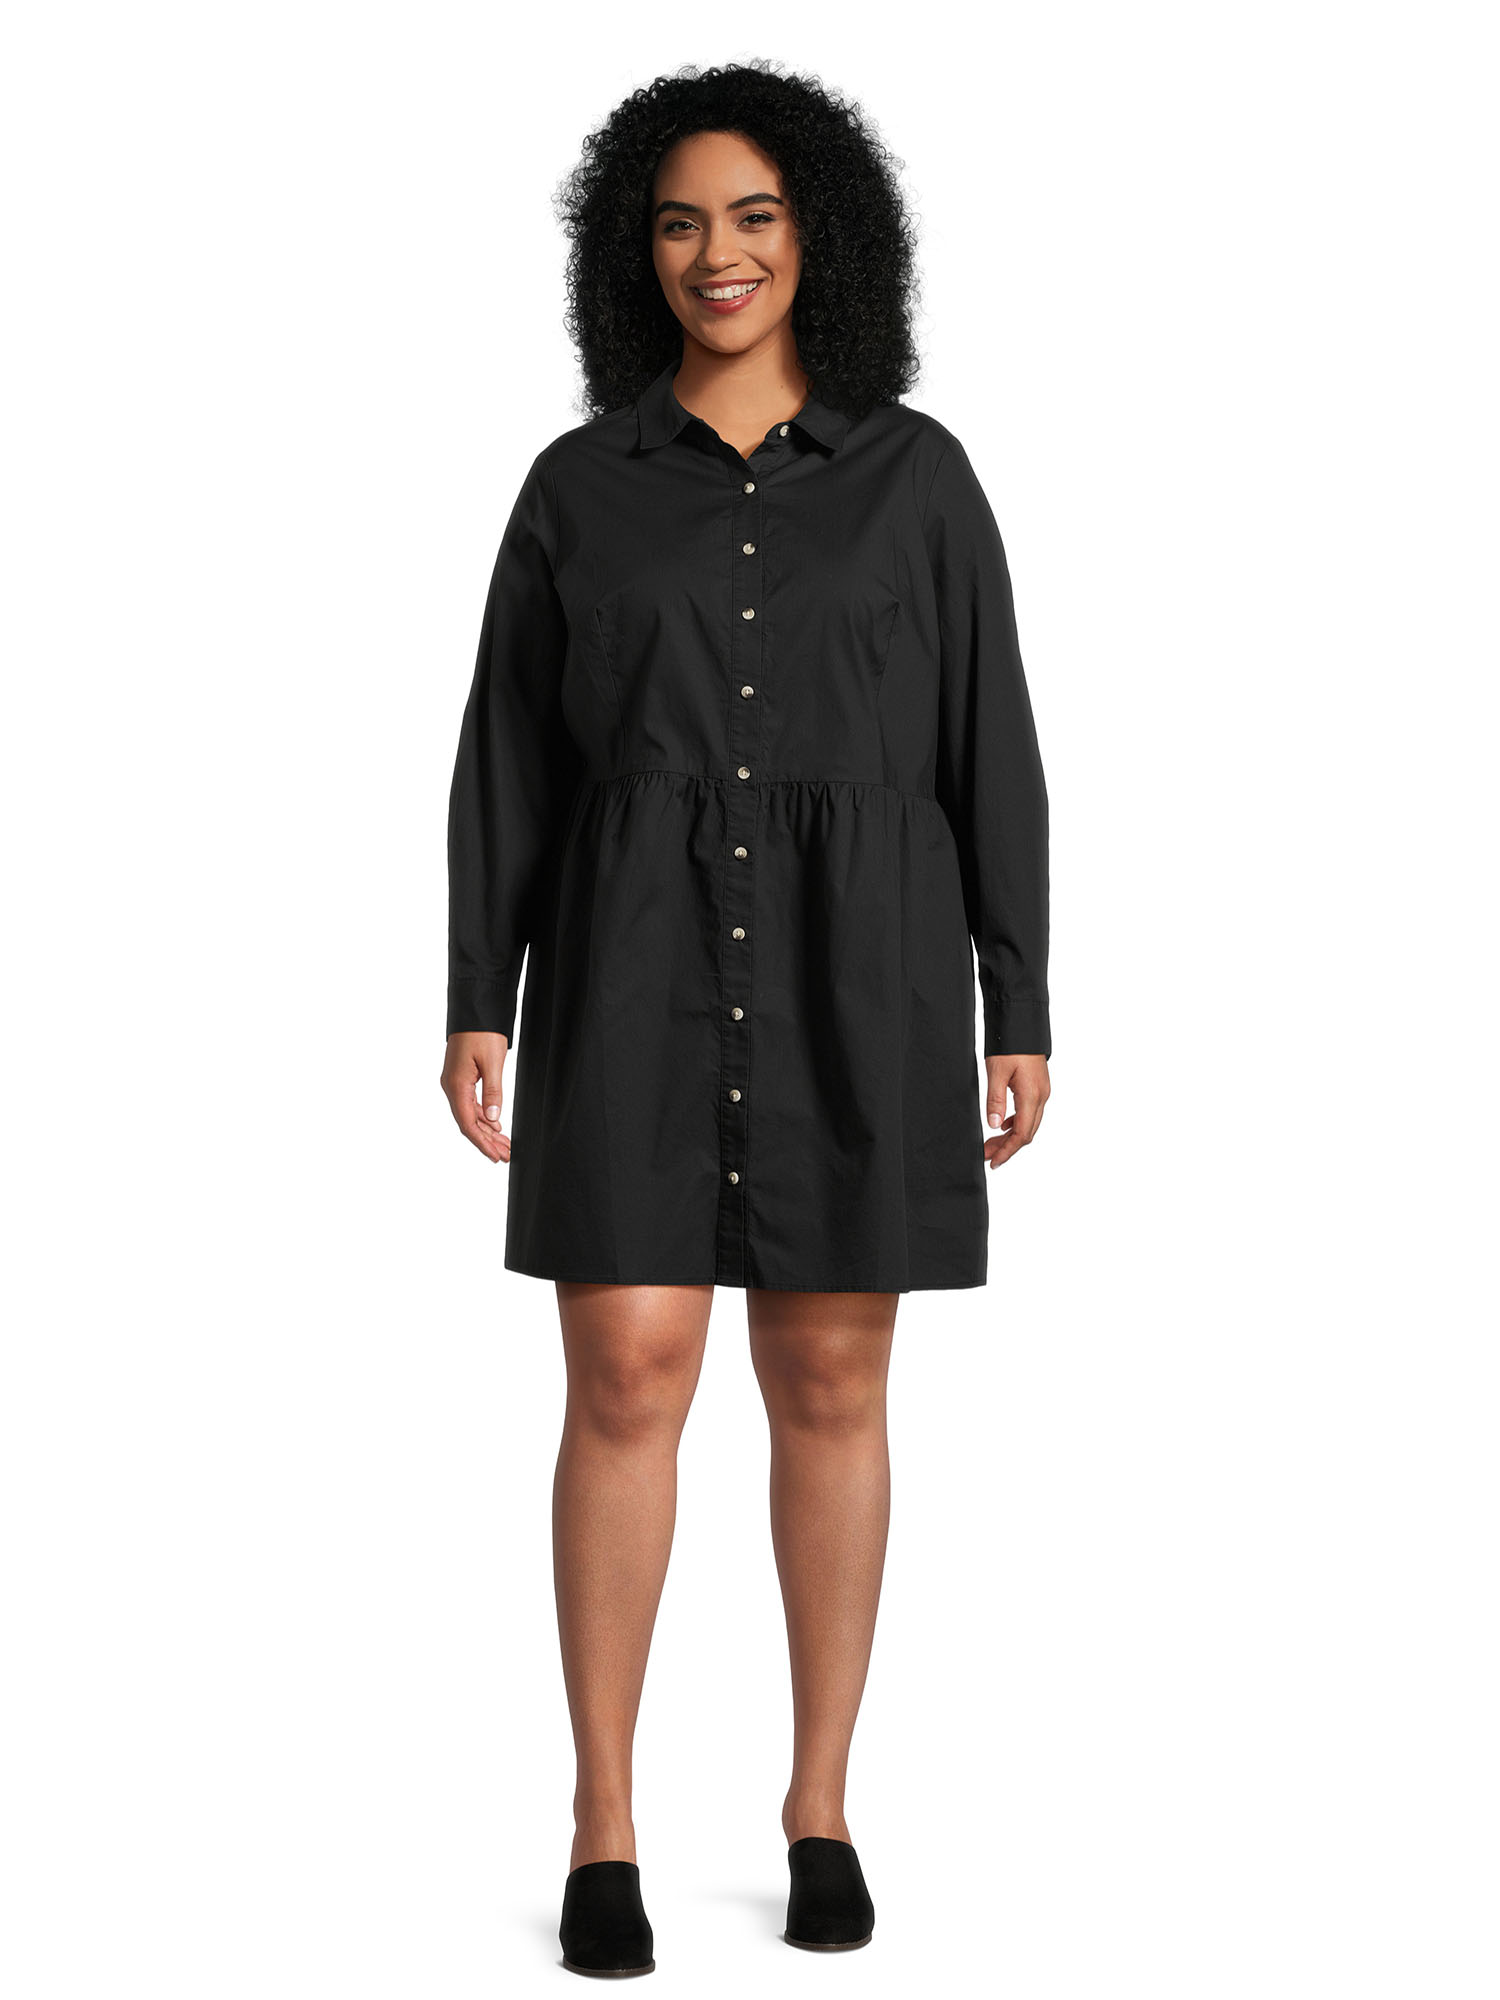 Nine.Eight Women's Plus Size Mini Shirtdress with Long Sleeves - image 2 of 6